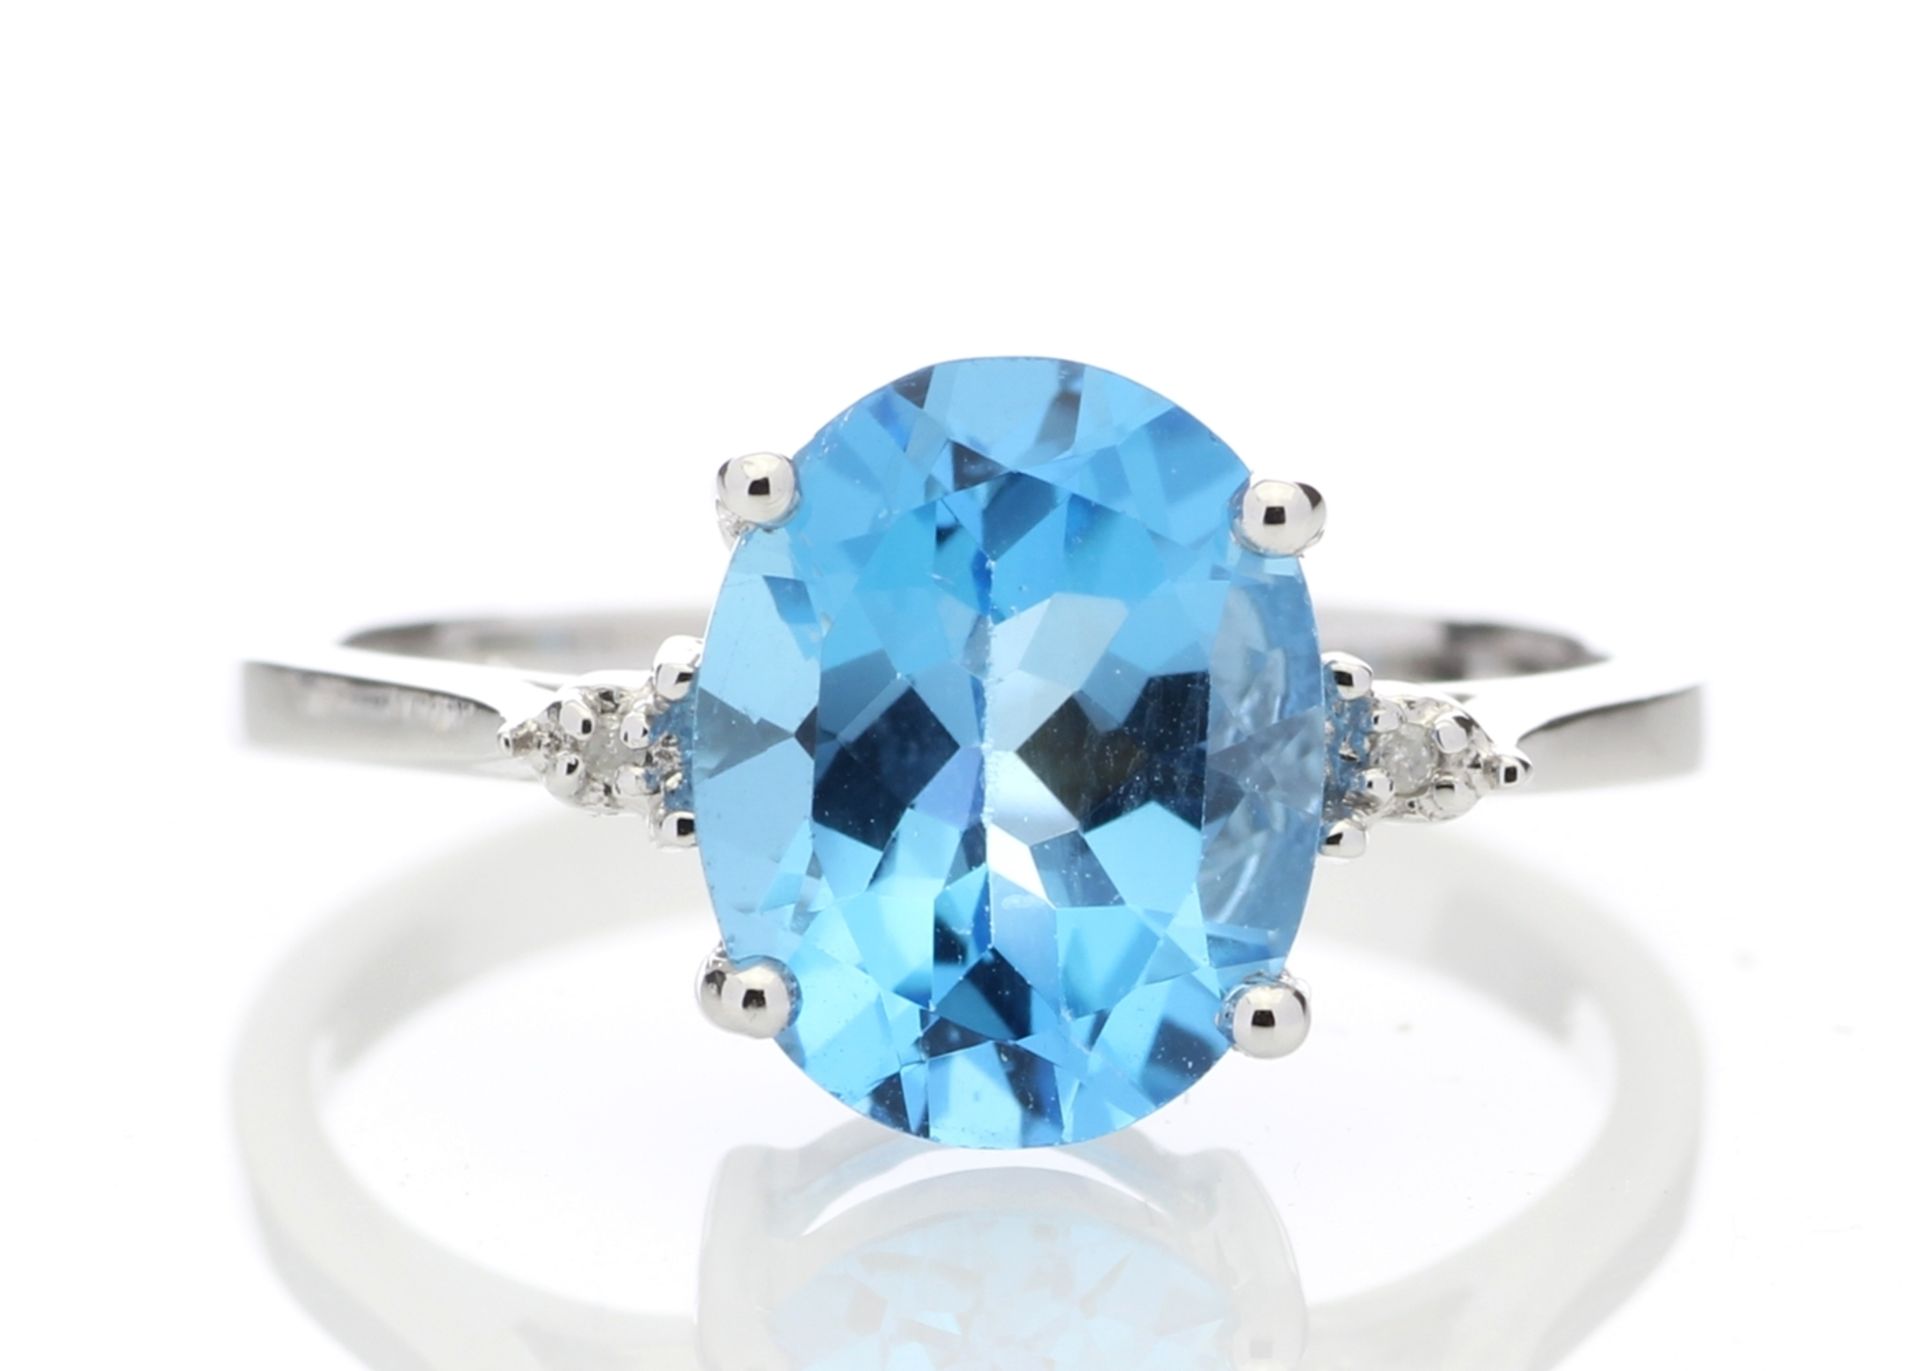 9ct White Gold Diamond And Blue Topaz Ring 0.01 Carats - Valued by GIE £1,370.00 - 9ct White Gold